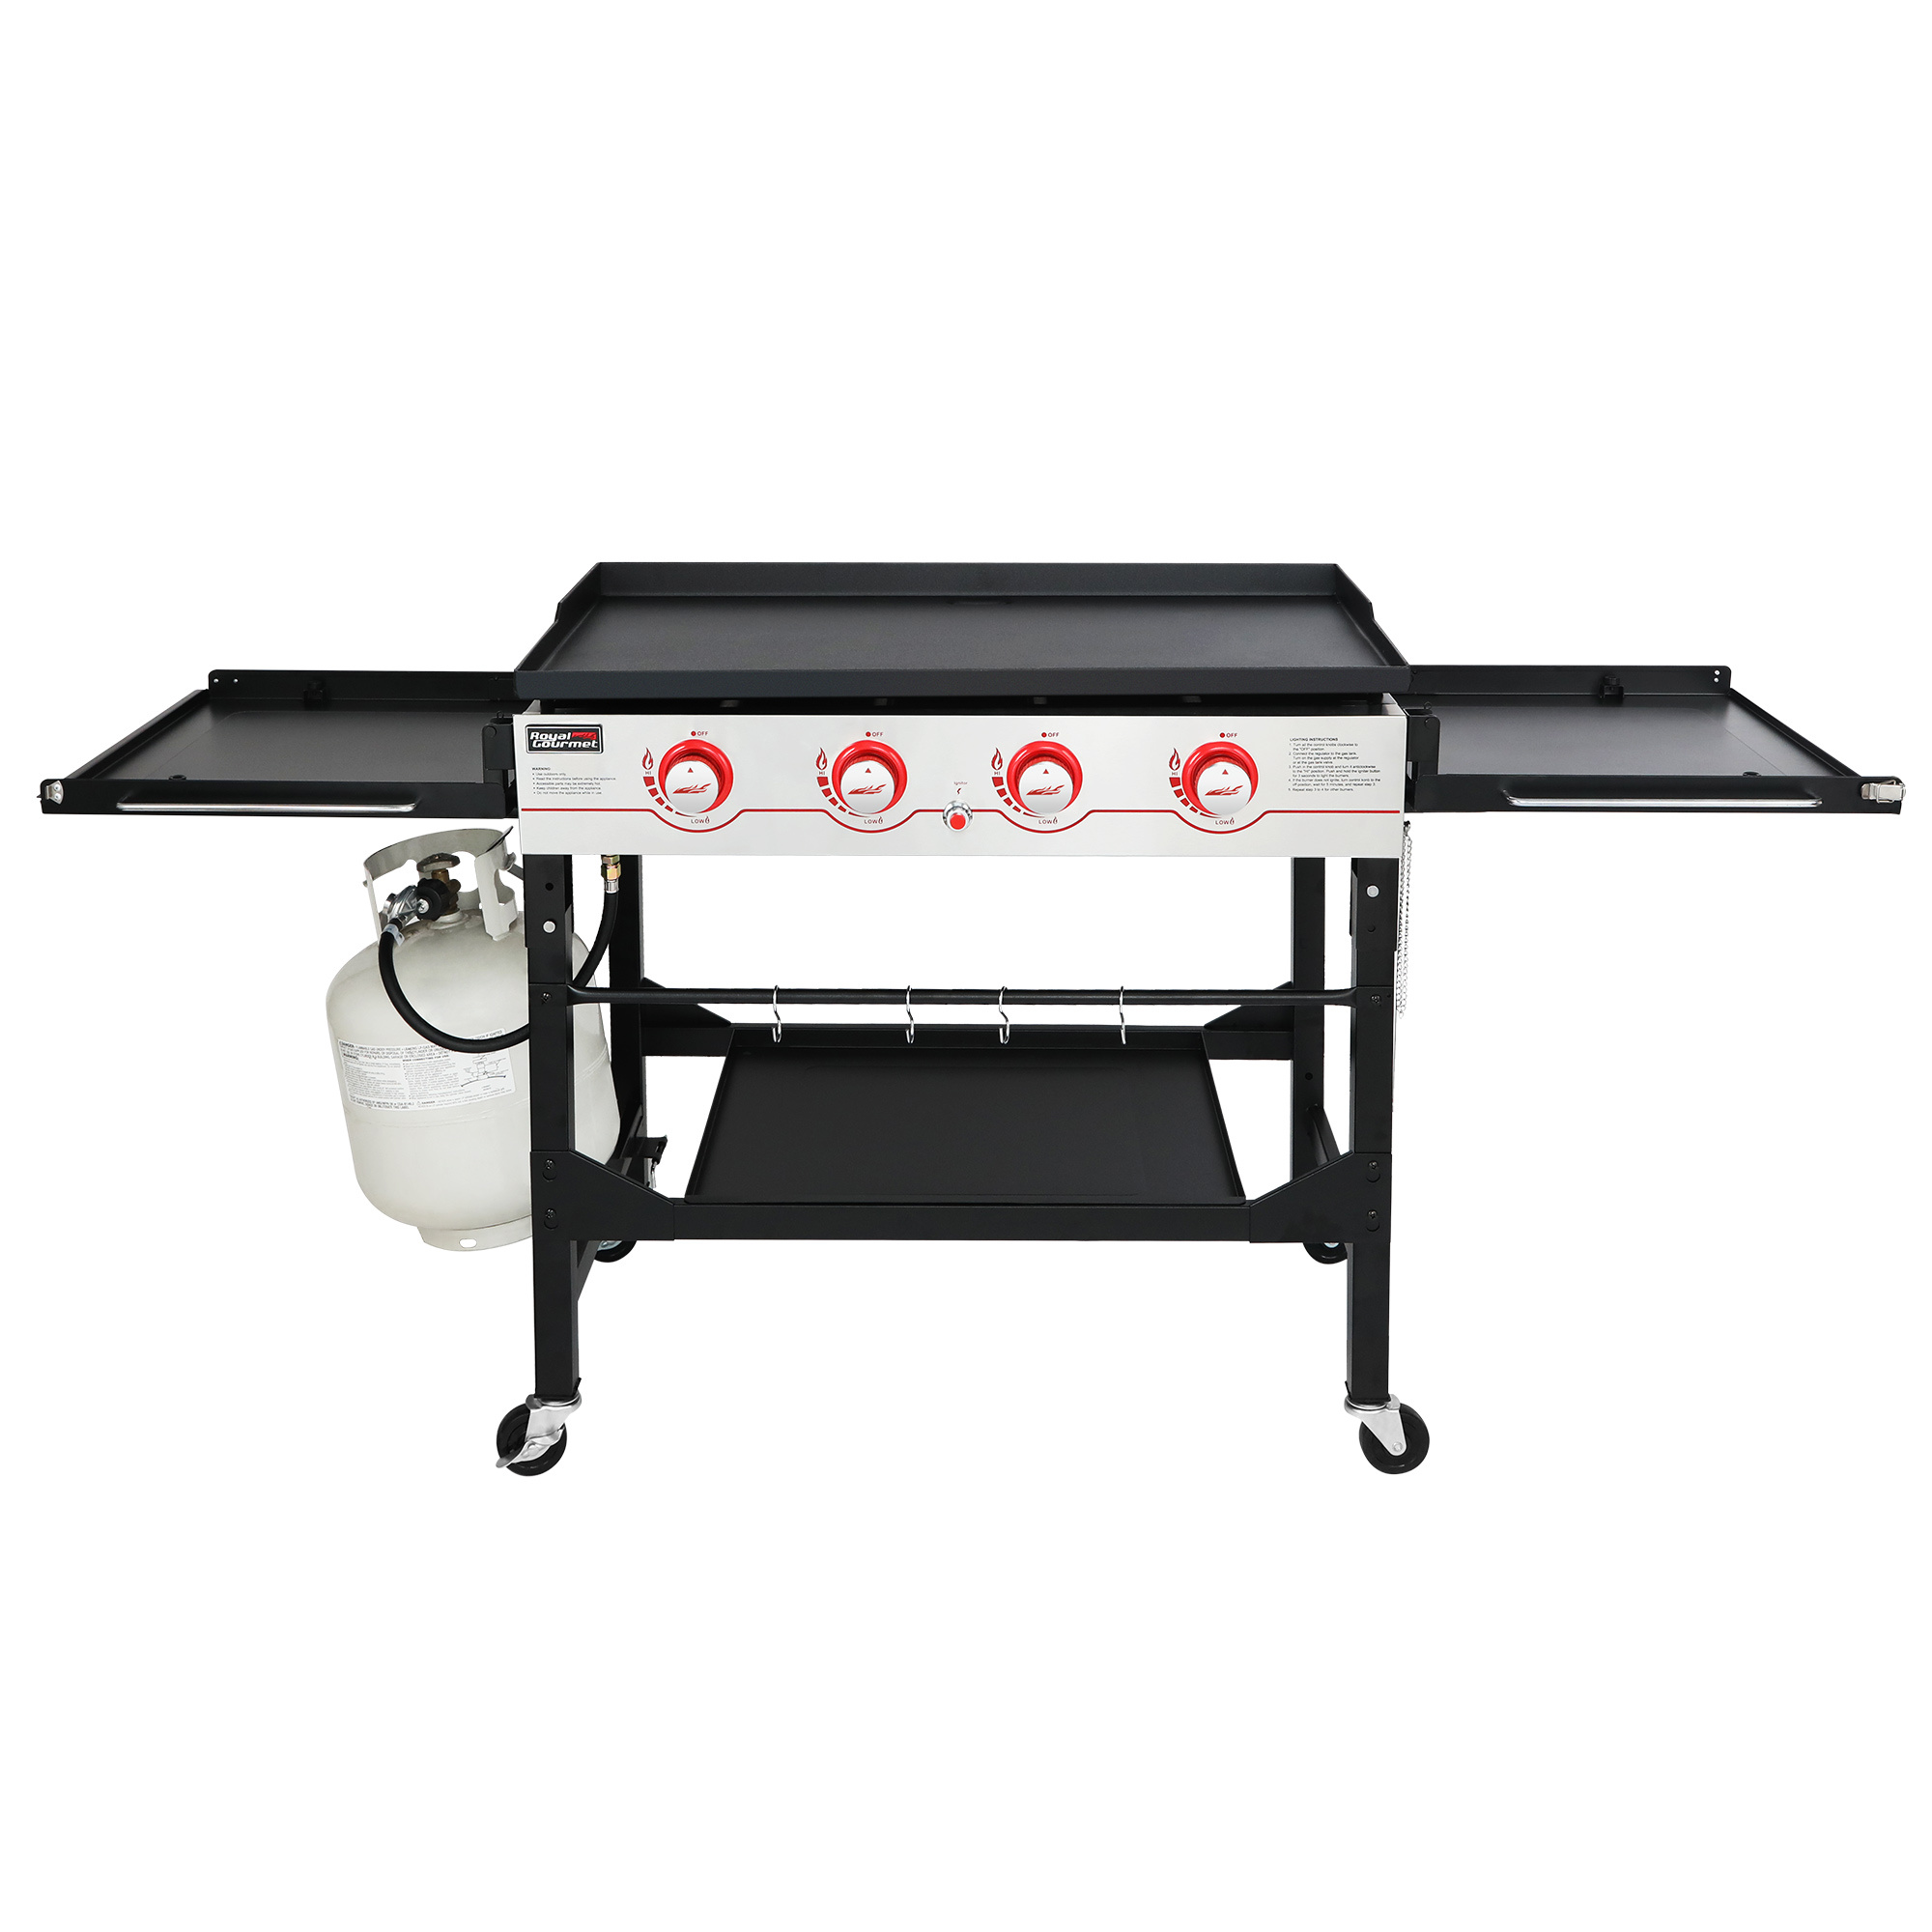 

Gb4000f 36-inch Flat Top Gas Griddle, 4-burner Propane Bbq Grill Griddle With Top Cover Lid, Folding Side Shelves And Legs For Large Outdoor Camping, Black